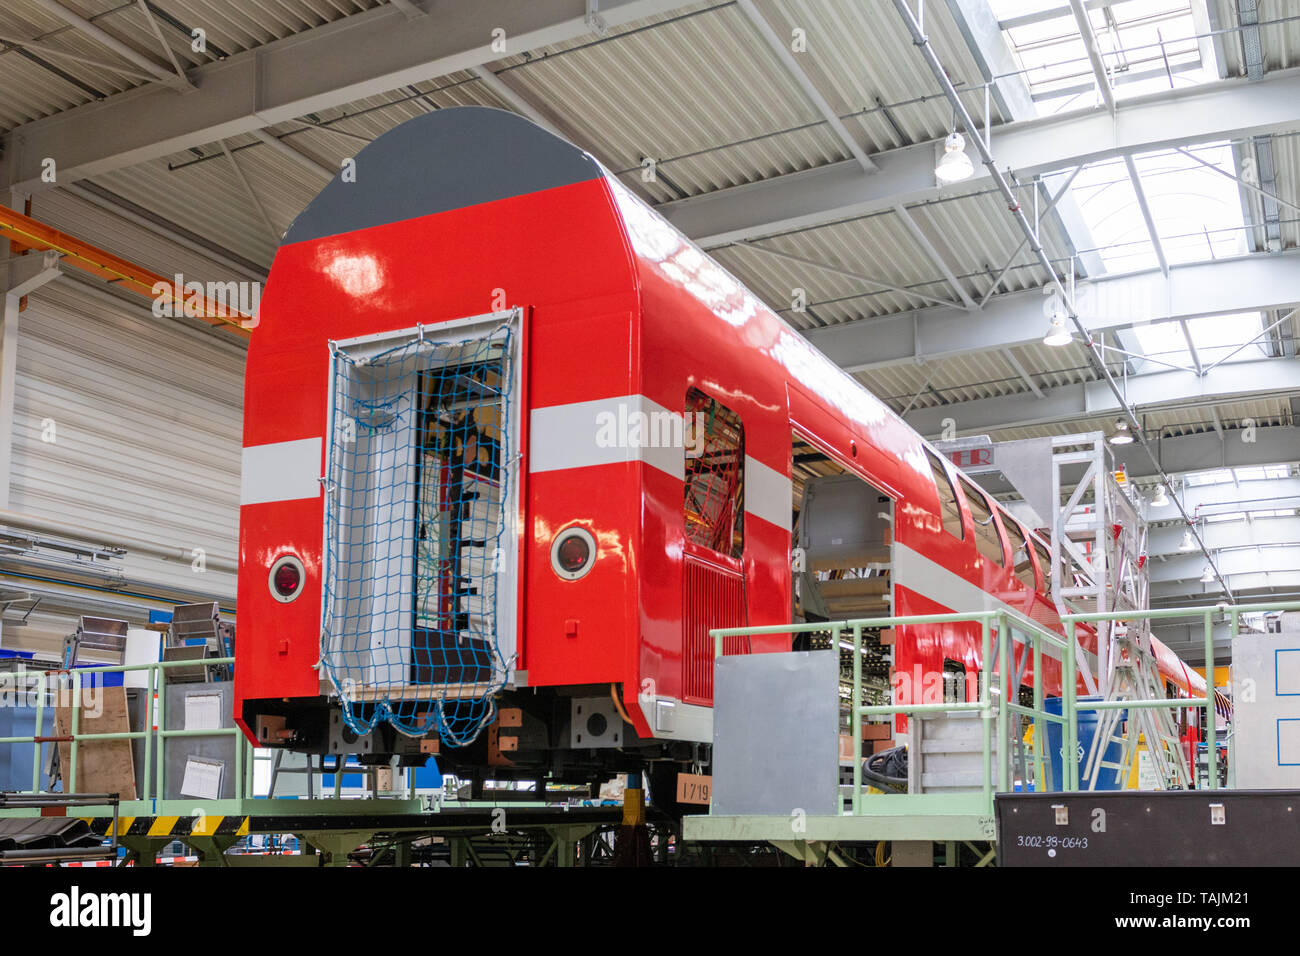 Görlitz, Germany, May 25, 2019 - Double-decker cars for the railroad in Israel are currently being built at the Bombardier plant in Görlitz. Stock Photo